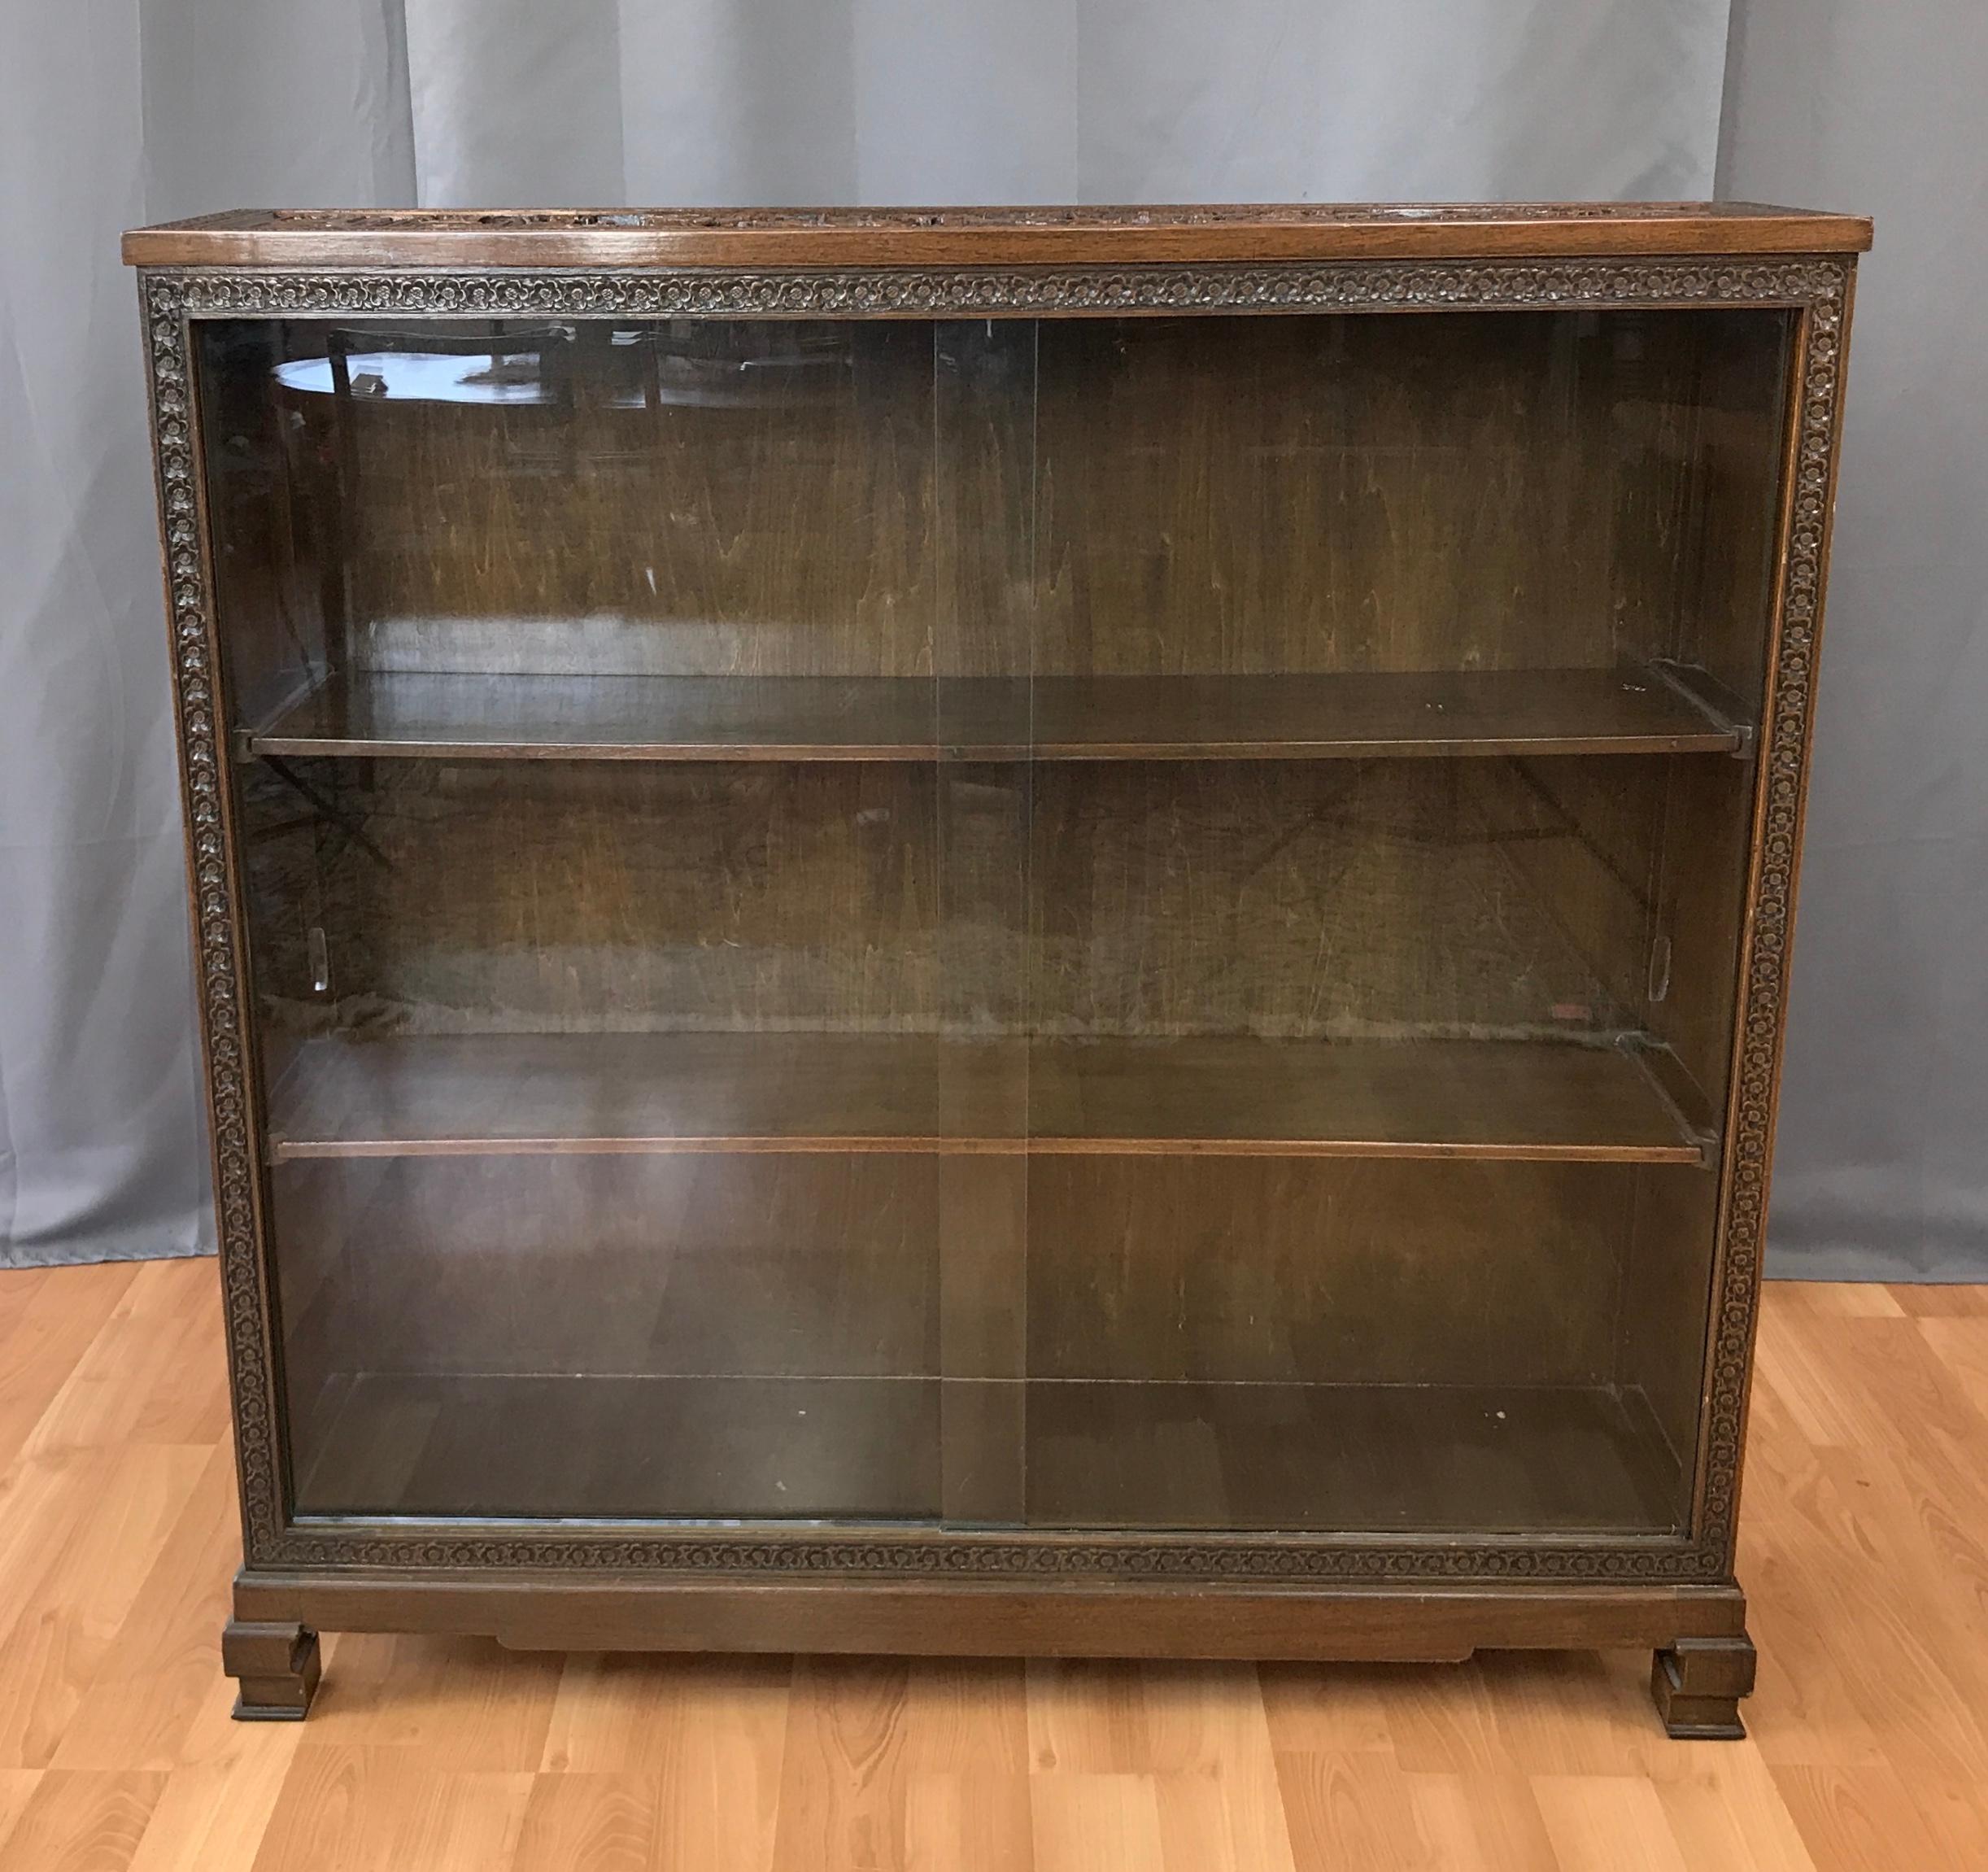 This wonderful vintage Korean Elmwood glass fronted book case has intricately carved top and side panels which feature oriental temples, sail boats, forests, bridges, fishermen and scholars. All bordered by rows of carved flowers which also surround